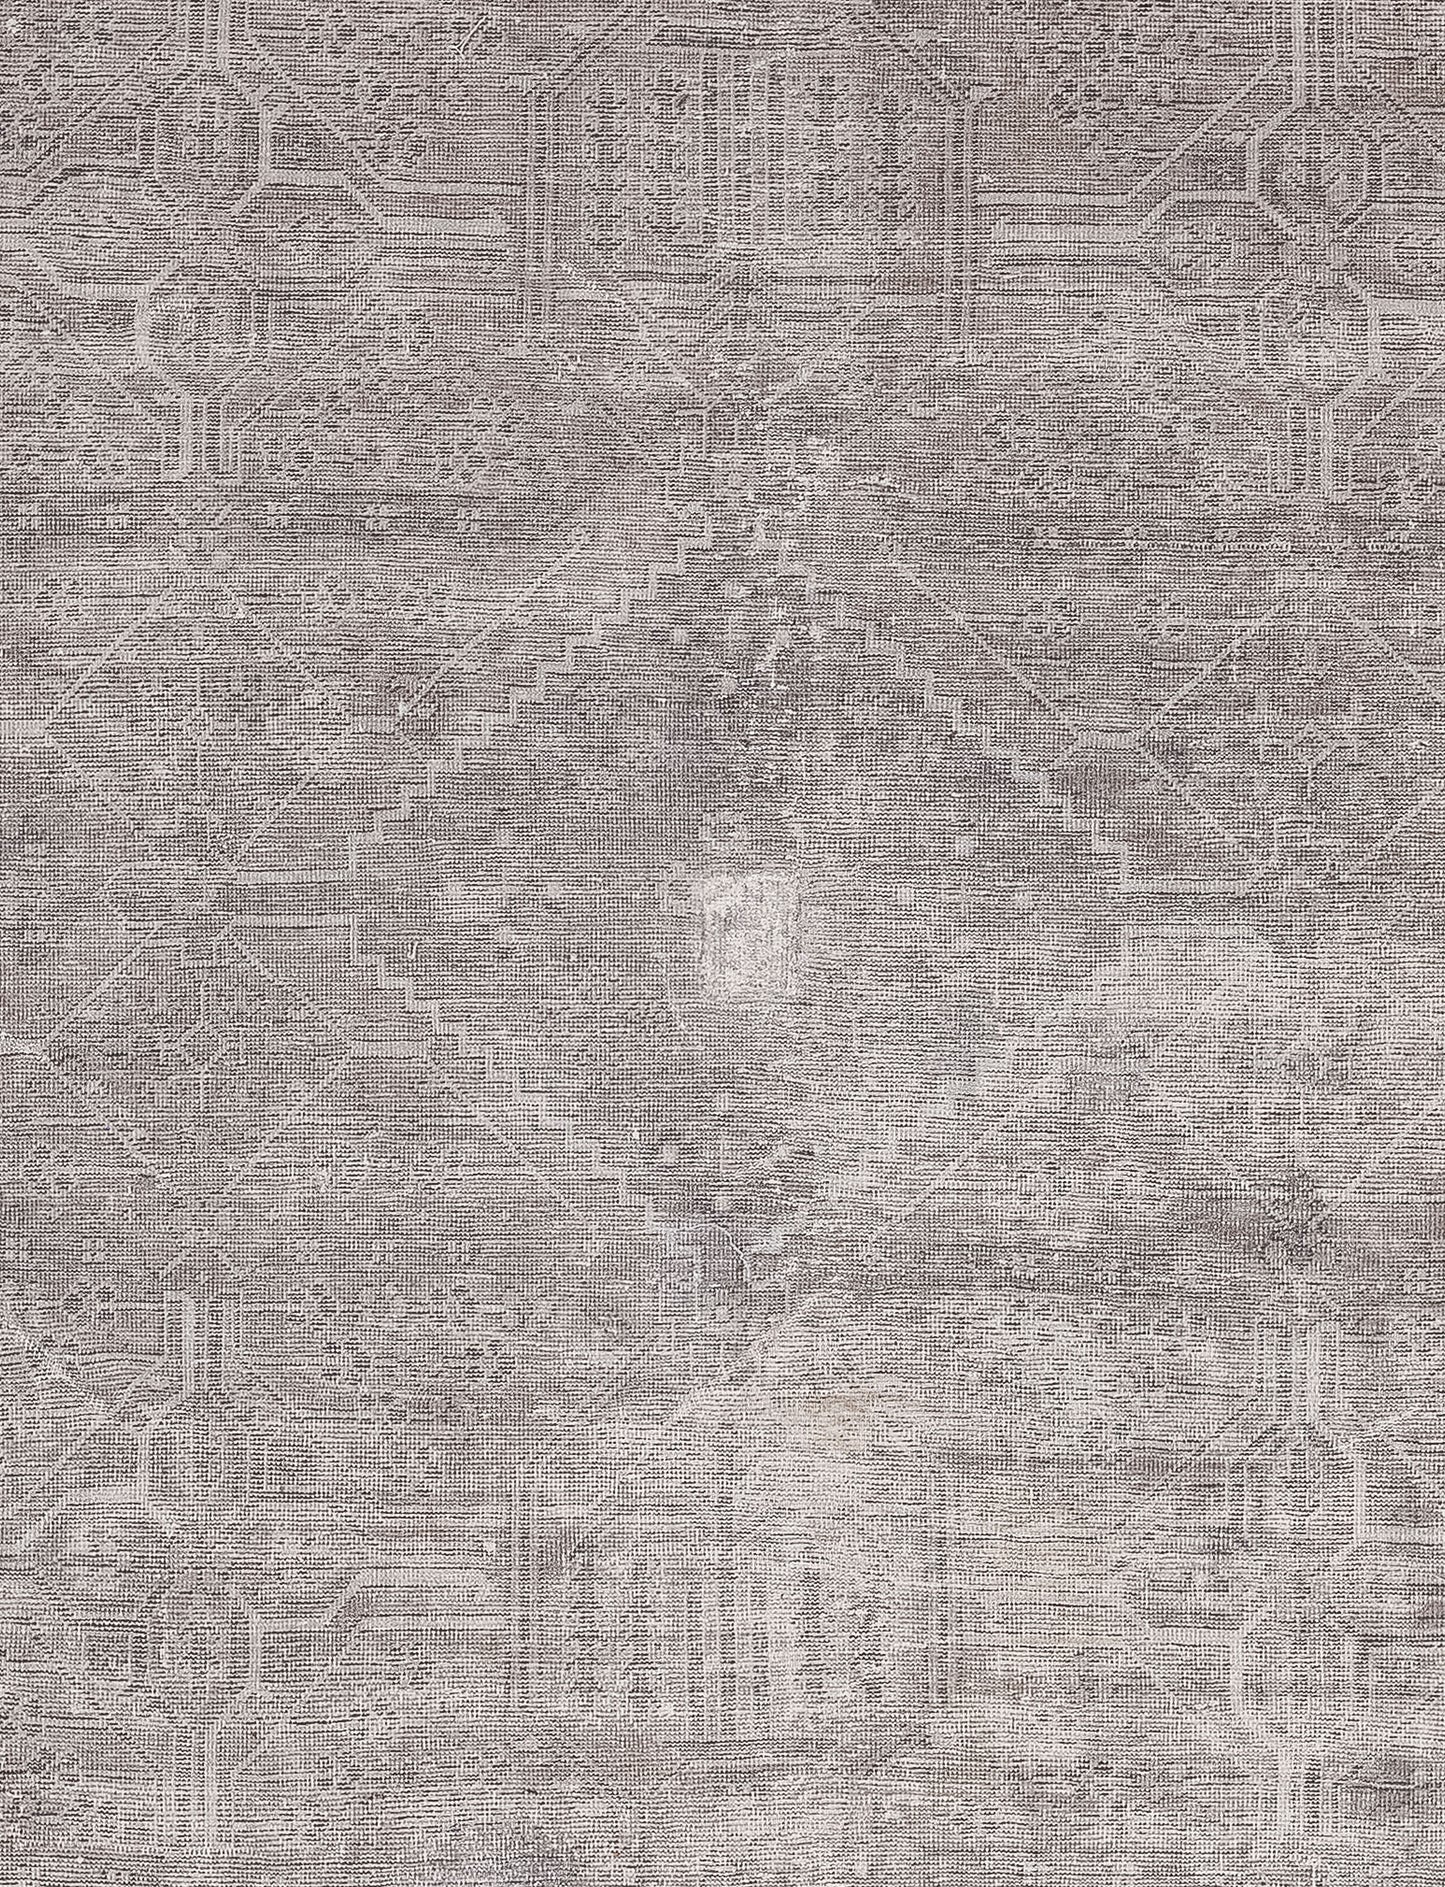 The center of the rug features two fused pyramids creating a diamond shape with abstract polygons merged on each edge. 